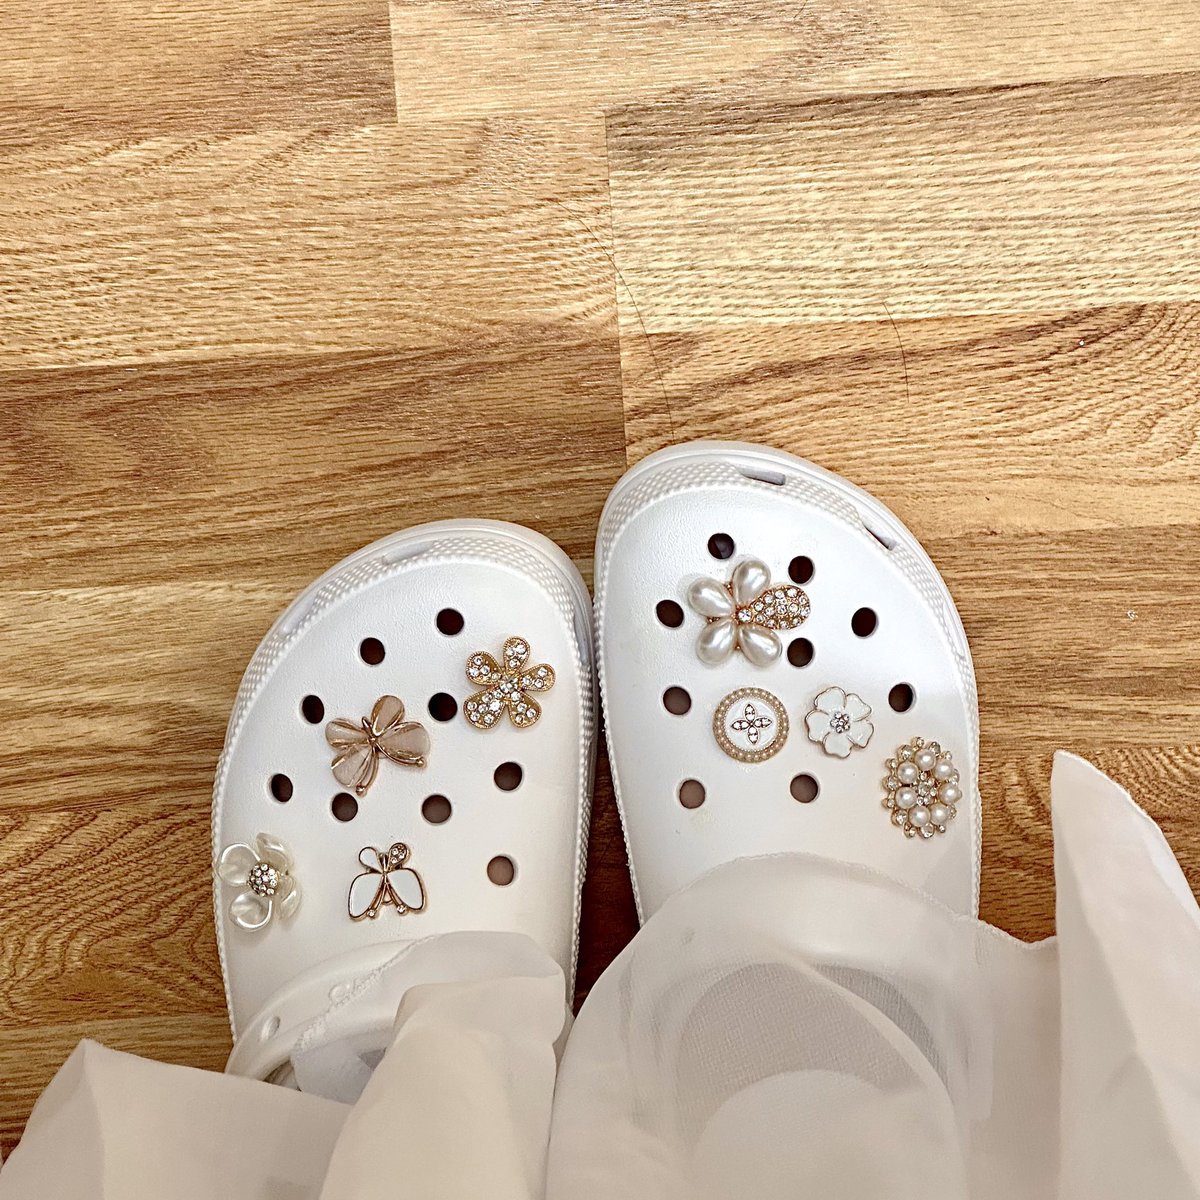 wore crocs with my xielian cosplay and even put on butterfly and flower charms for hualian 🦋🌸